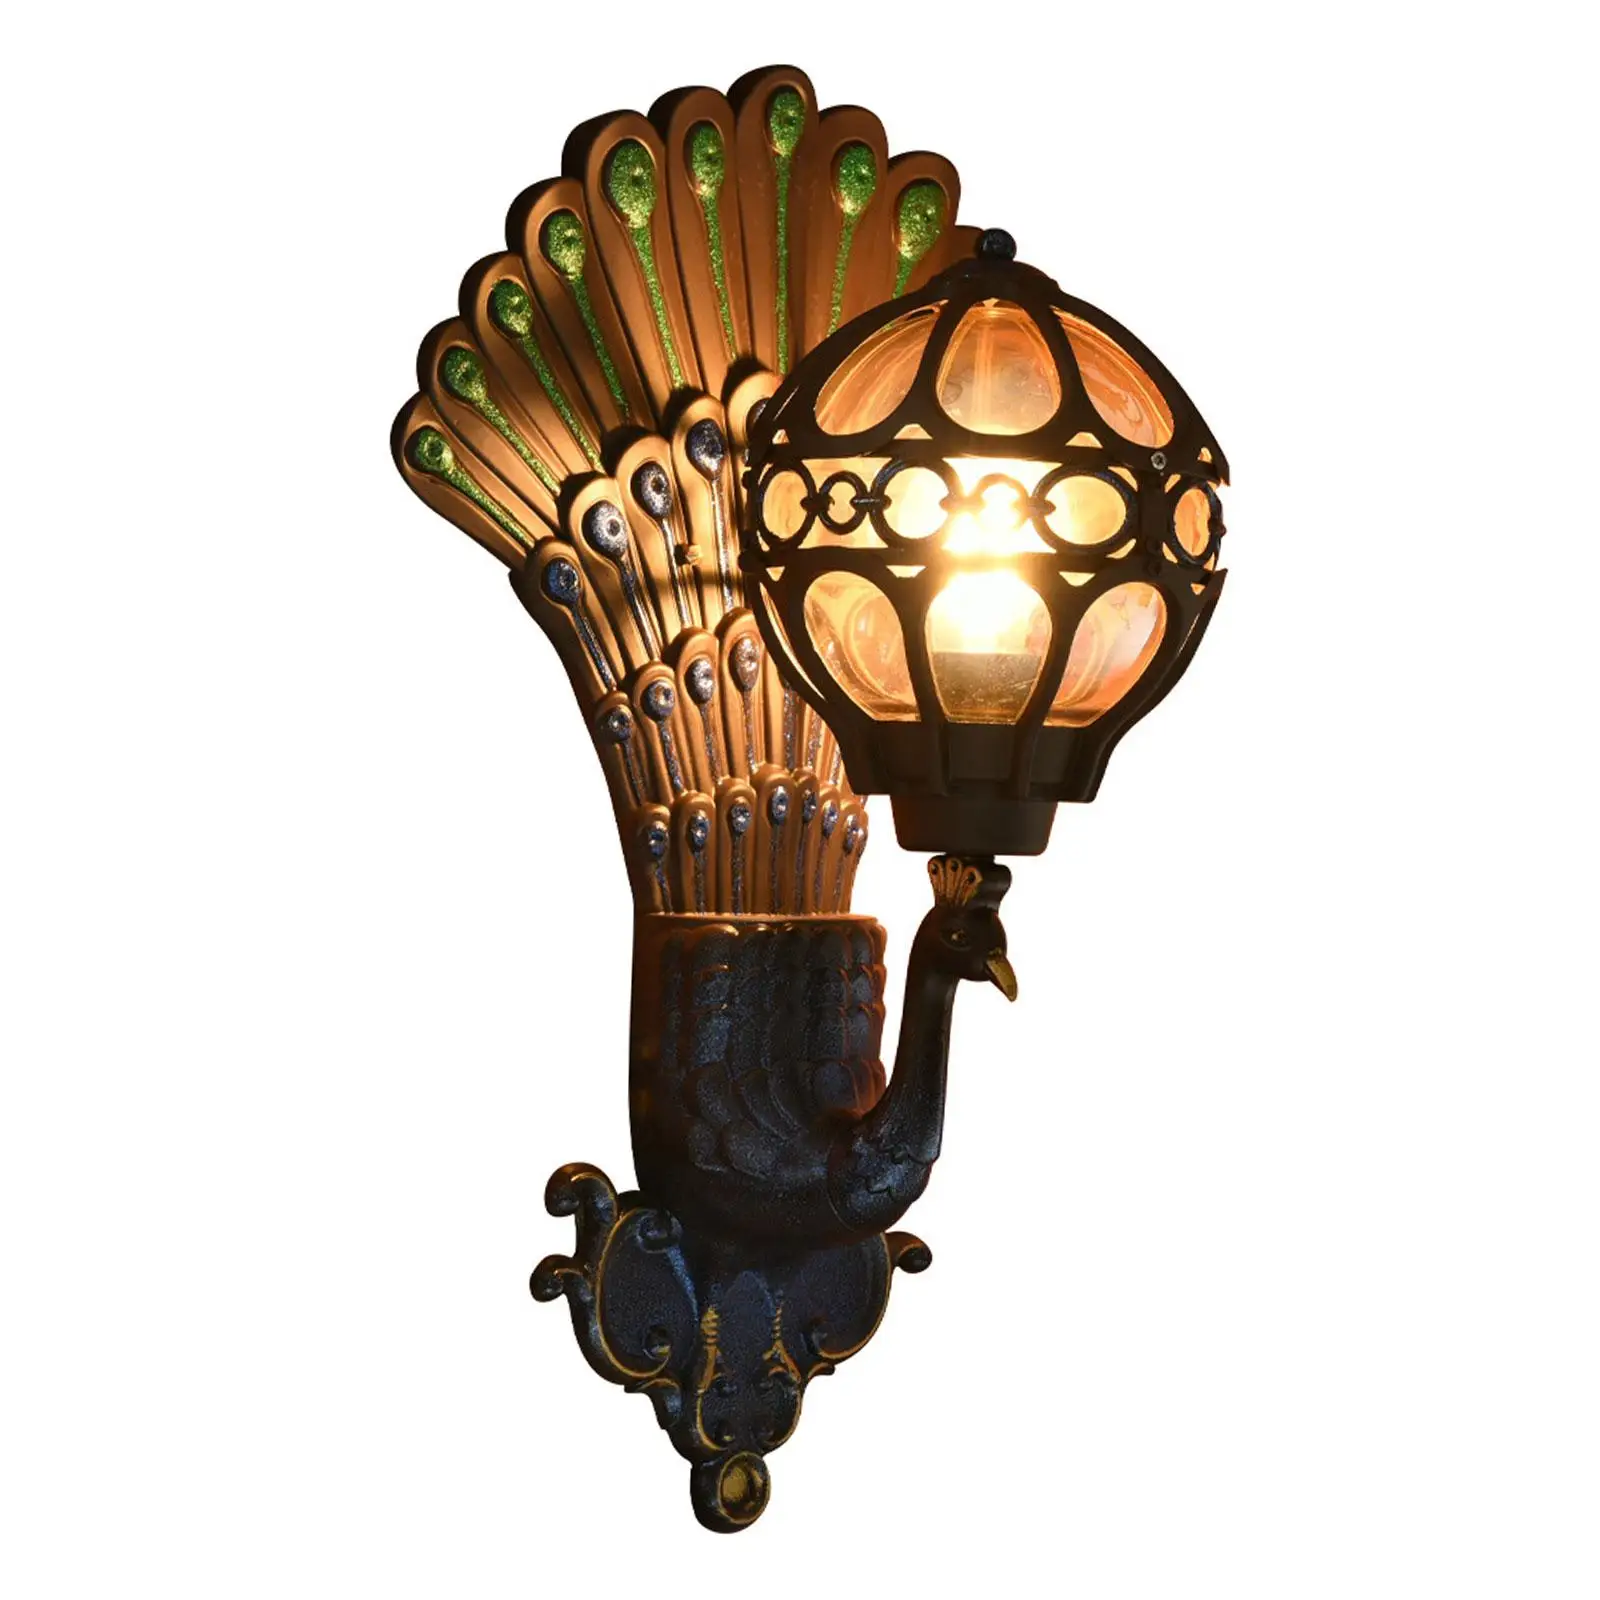 Outdoor Peacock Wall Light Retro Style Outdoor Wall Lamps Peacock Corridor Aisle Lights for Gate Hallway Yard Outdoor Patio